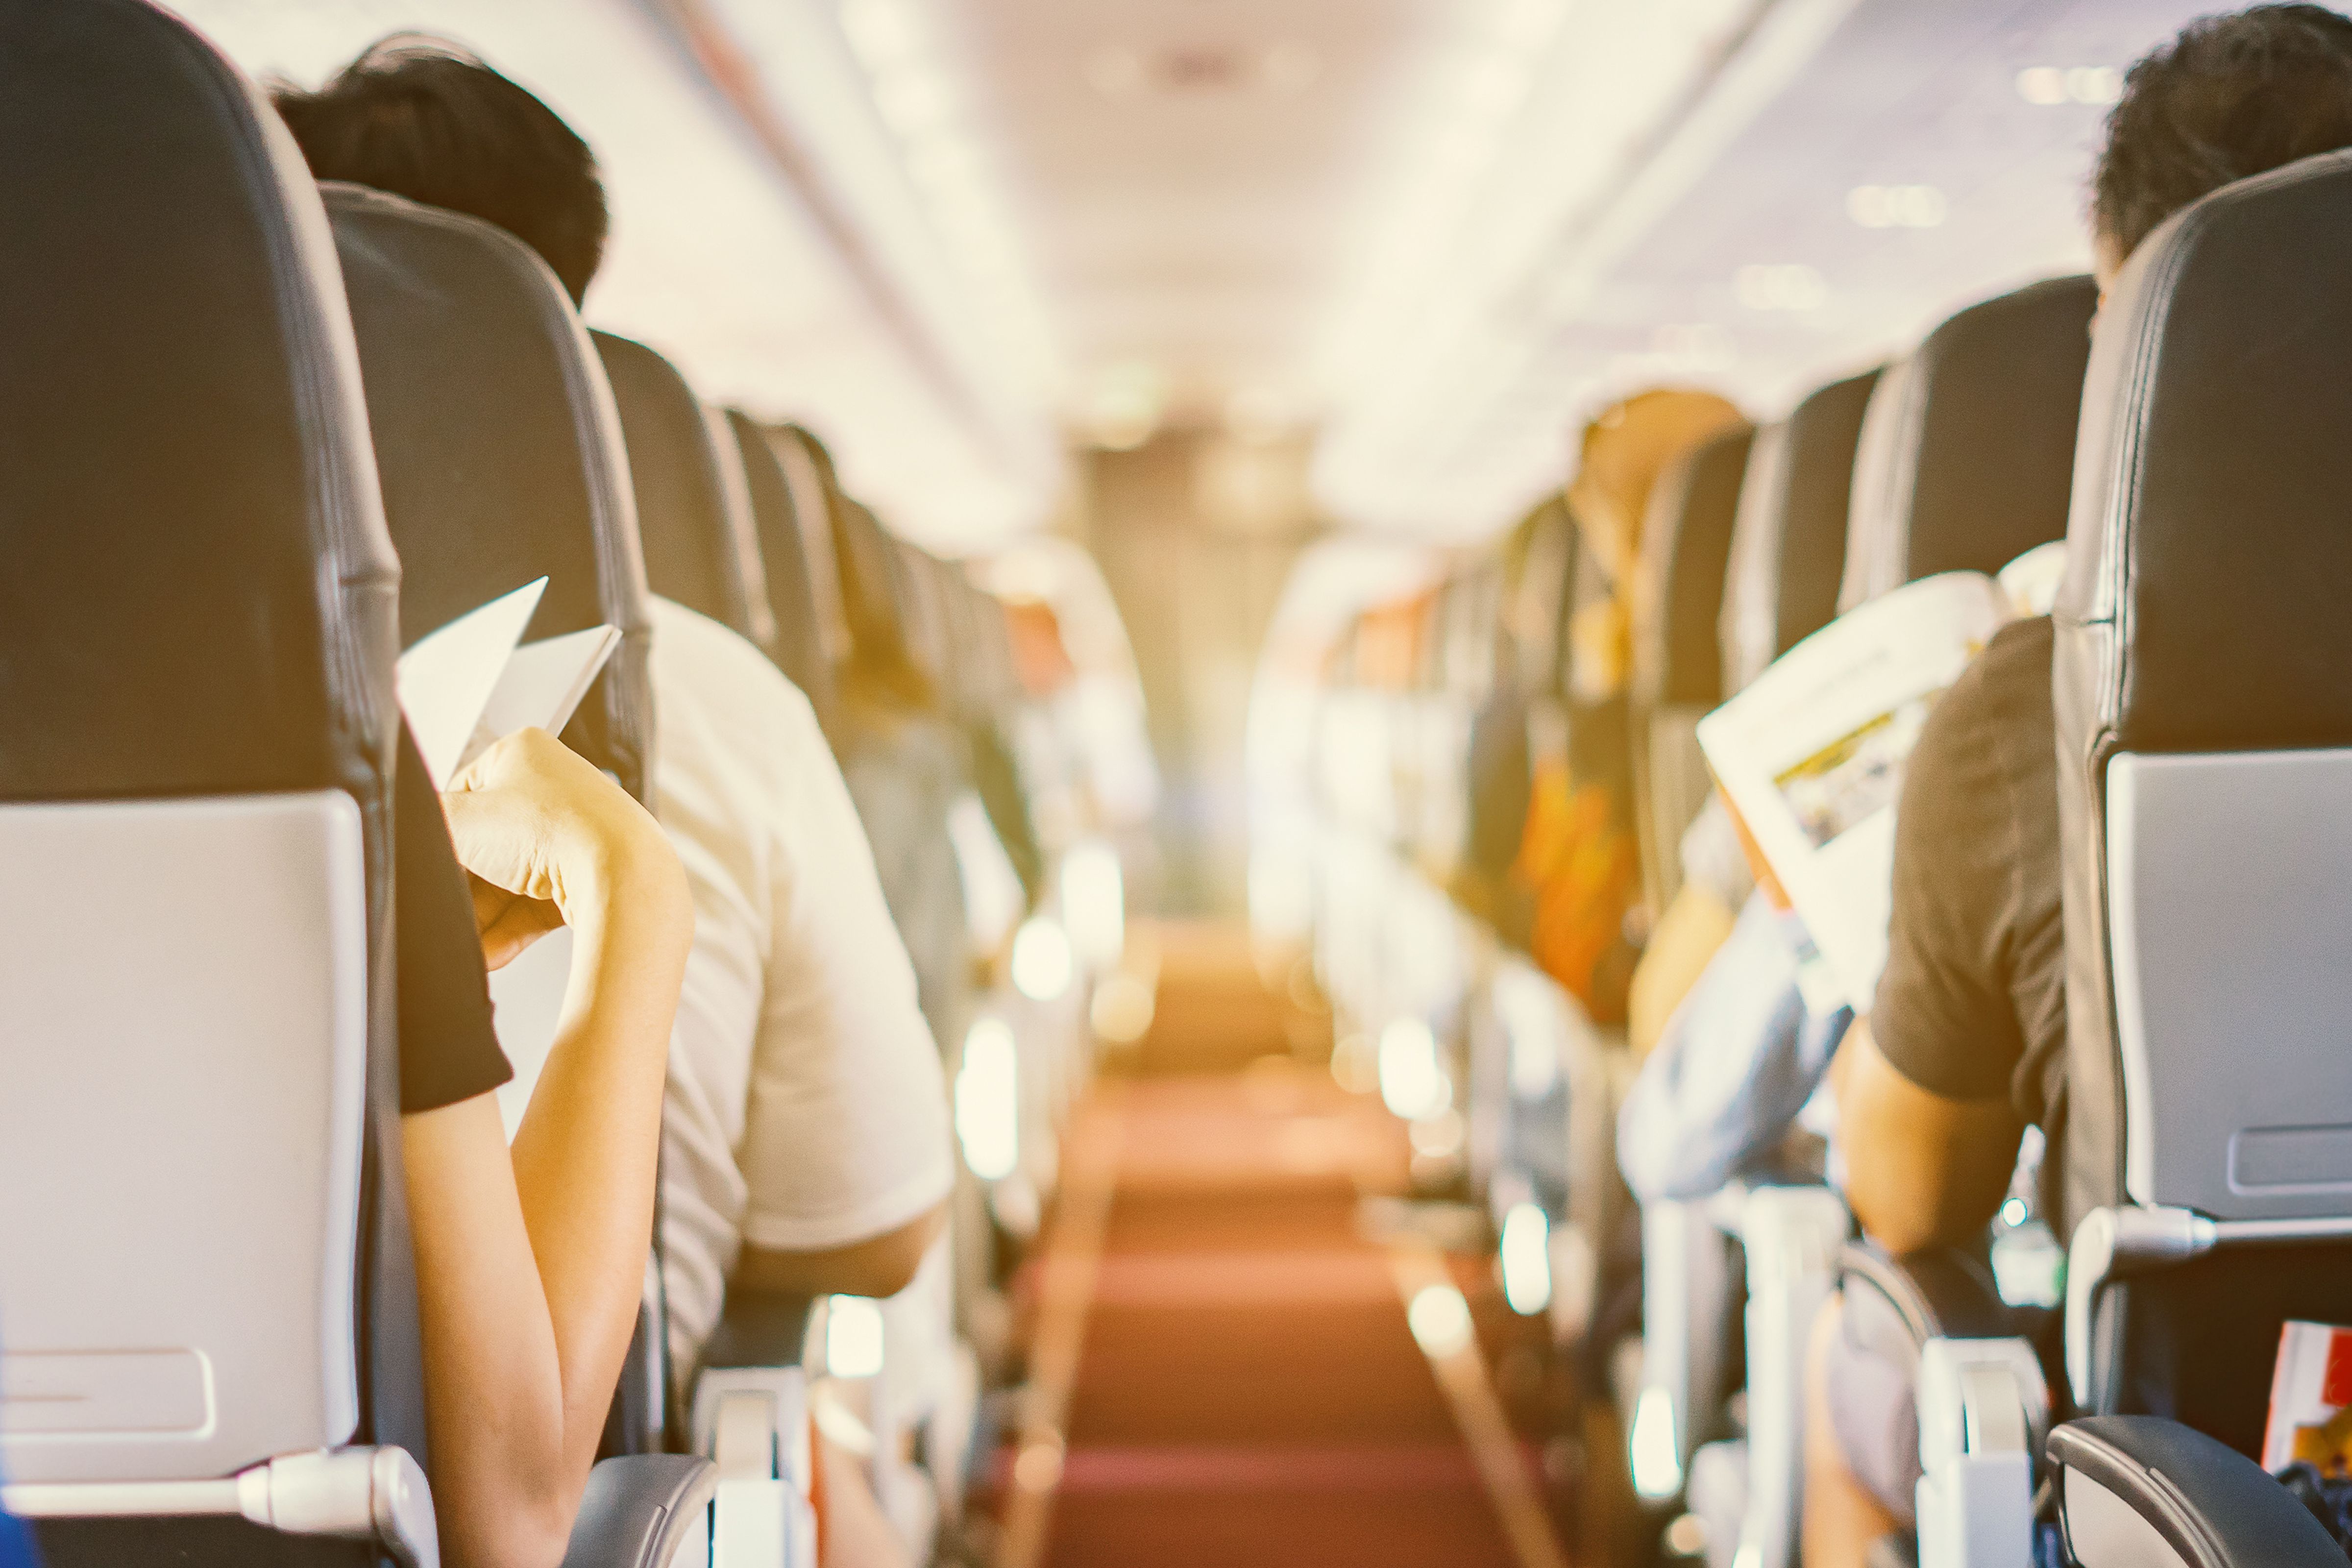 passenger seat, Interior of airplane with passengers sitting on seats and stewardess walking the aisle in background. Travel concept,vintage color,selective focus